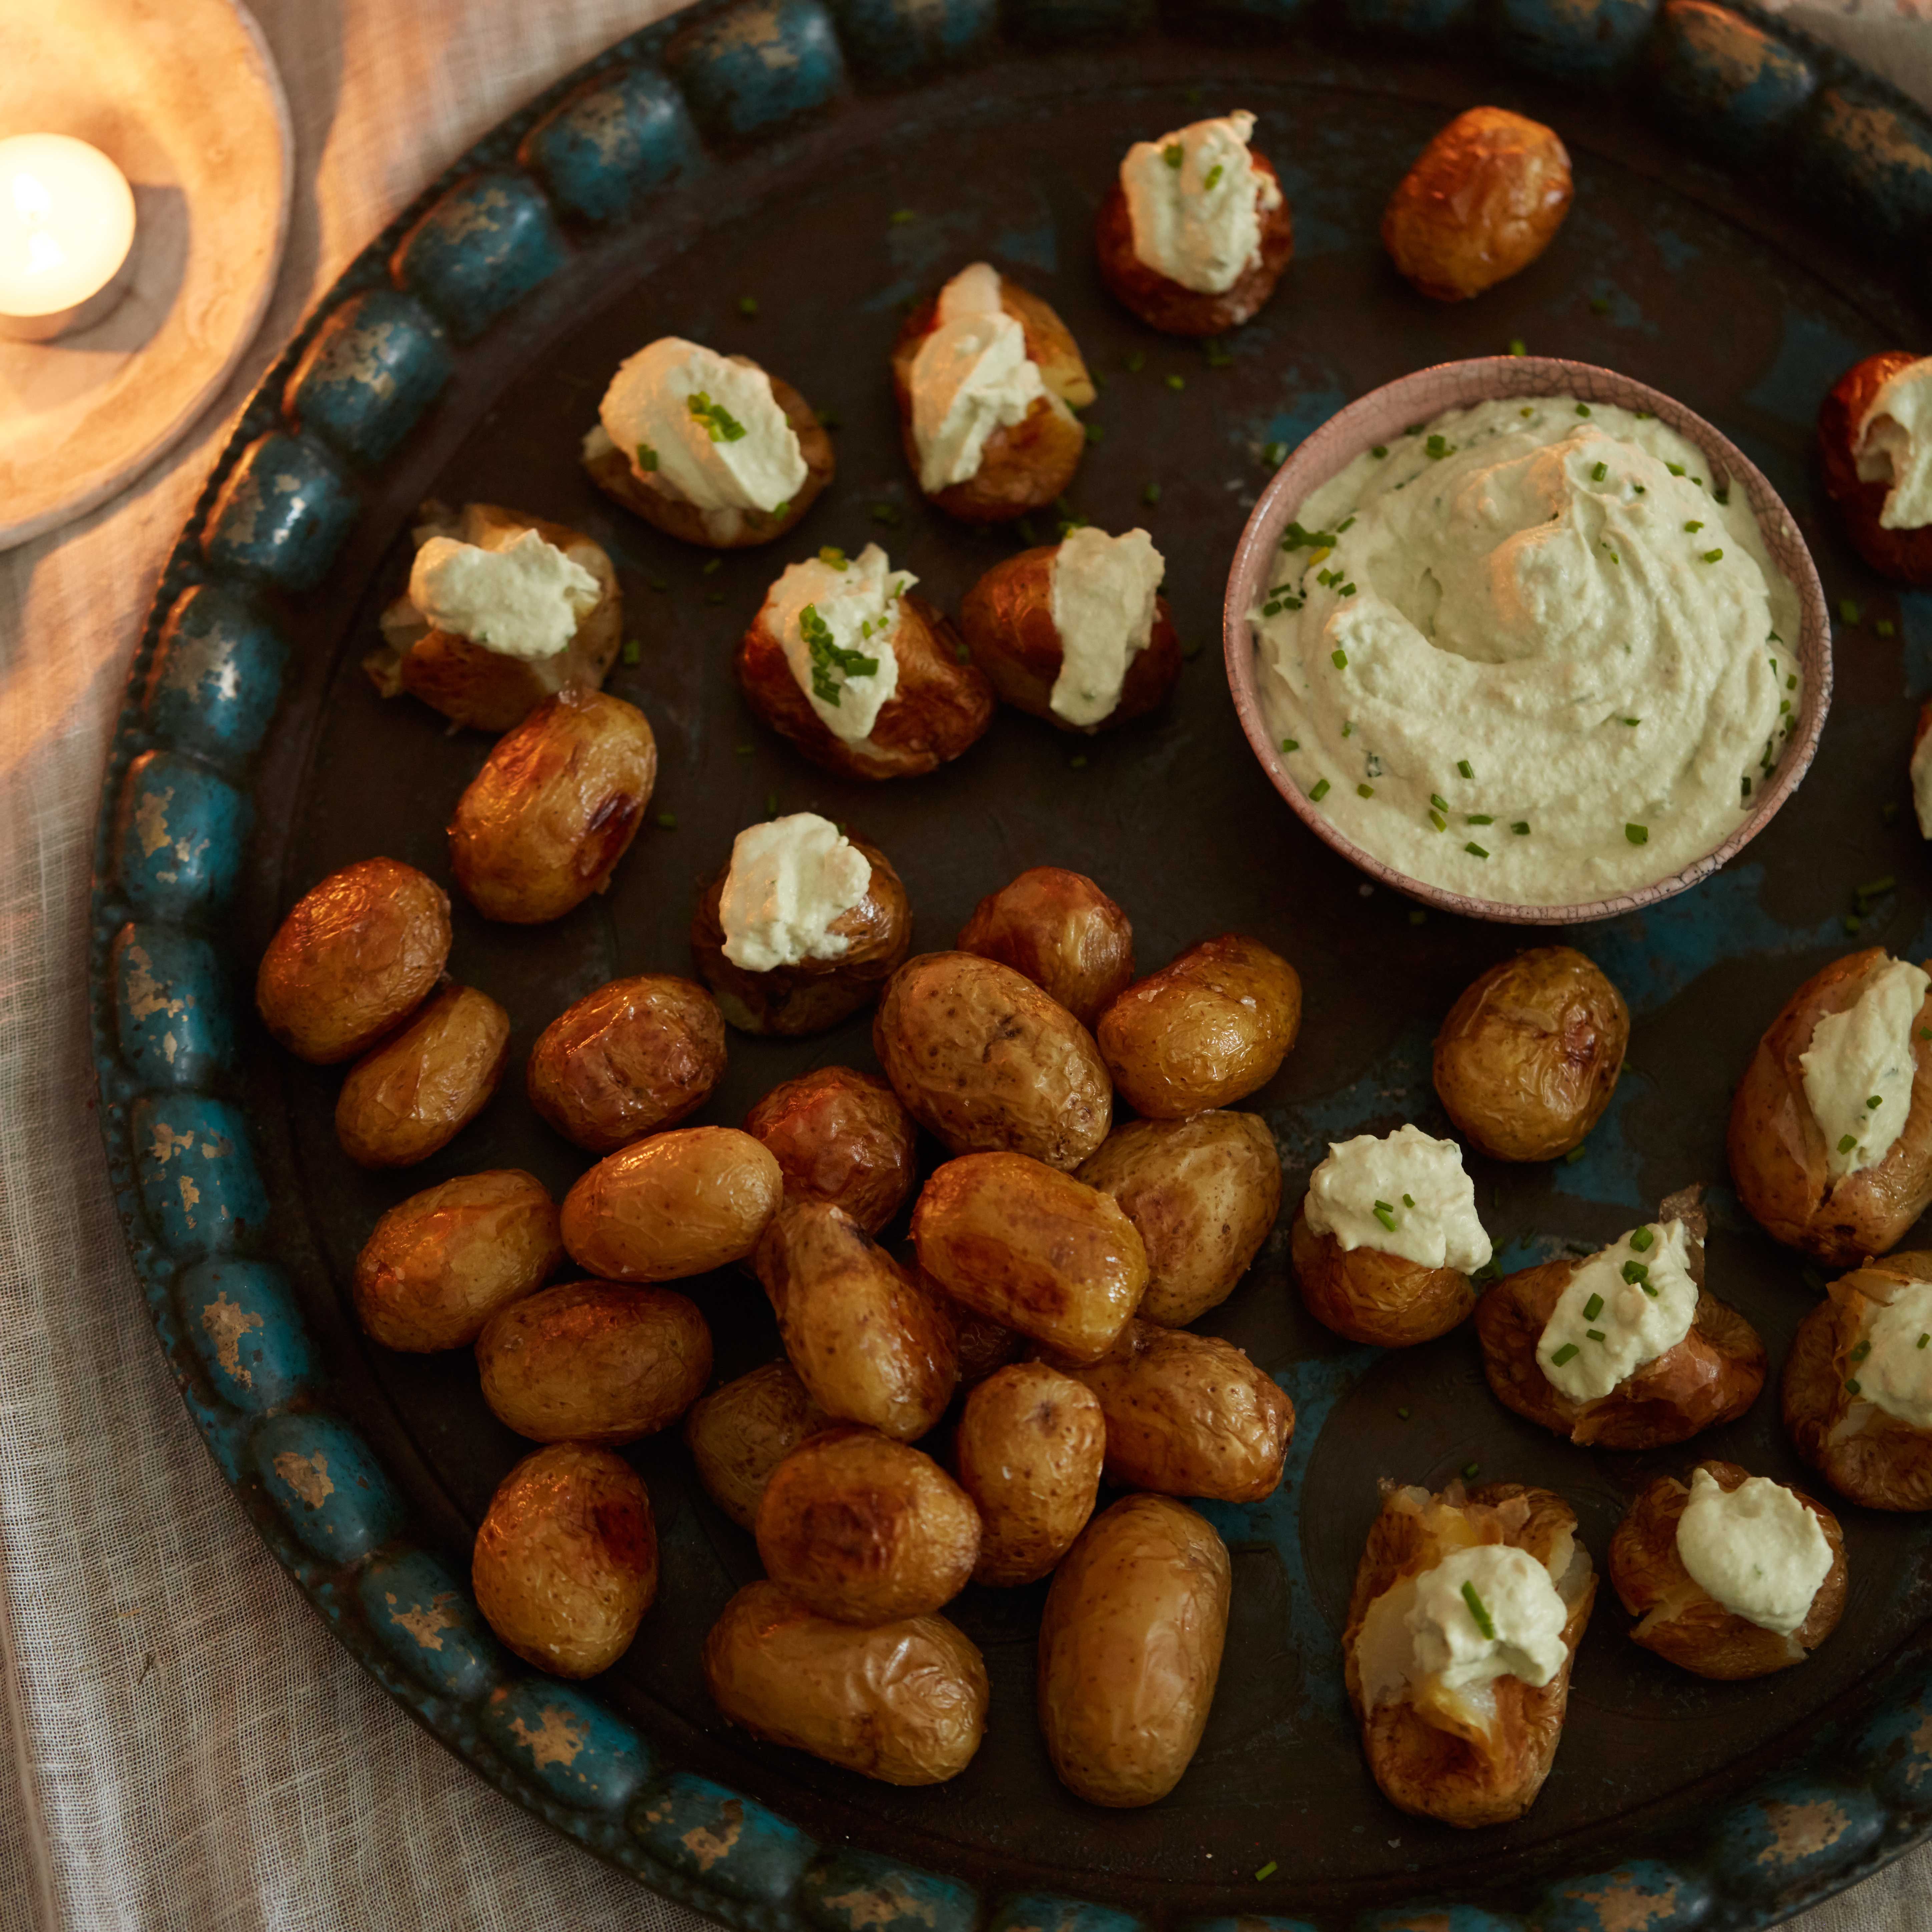 Baked Potatoes With Sour Cream Yoga Mat